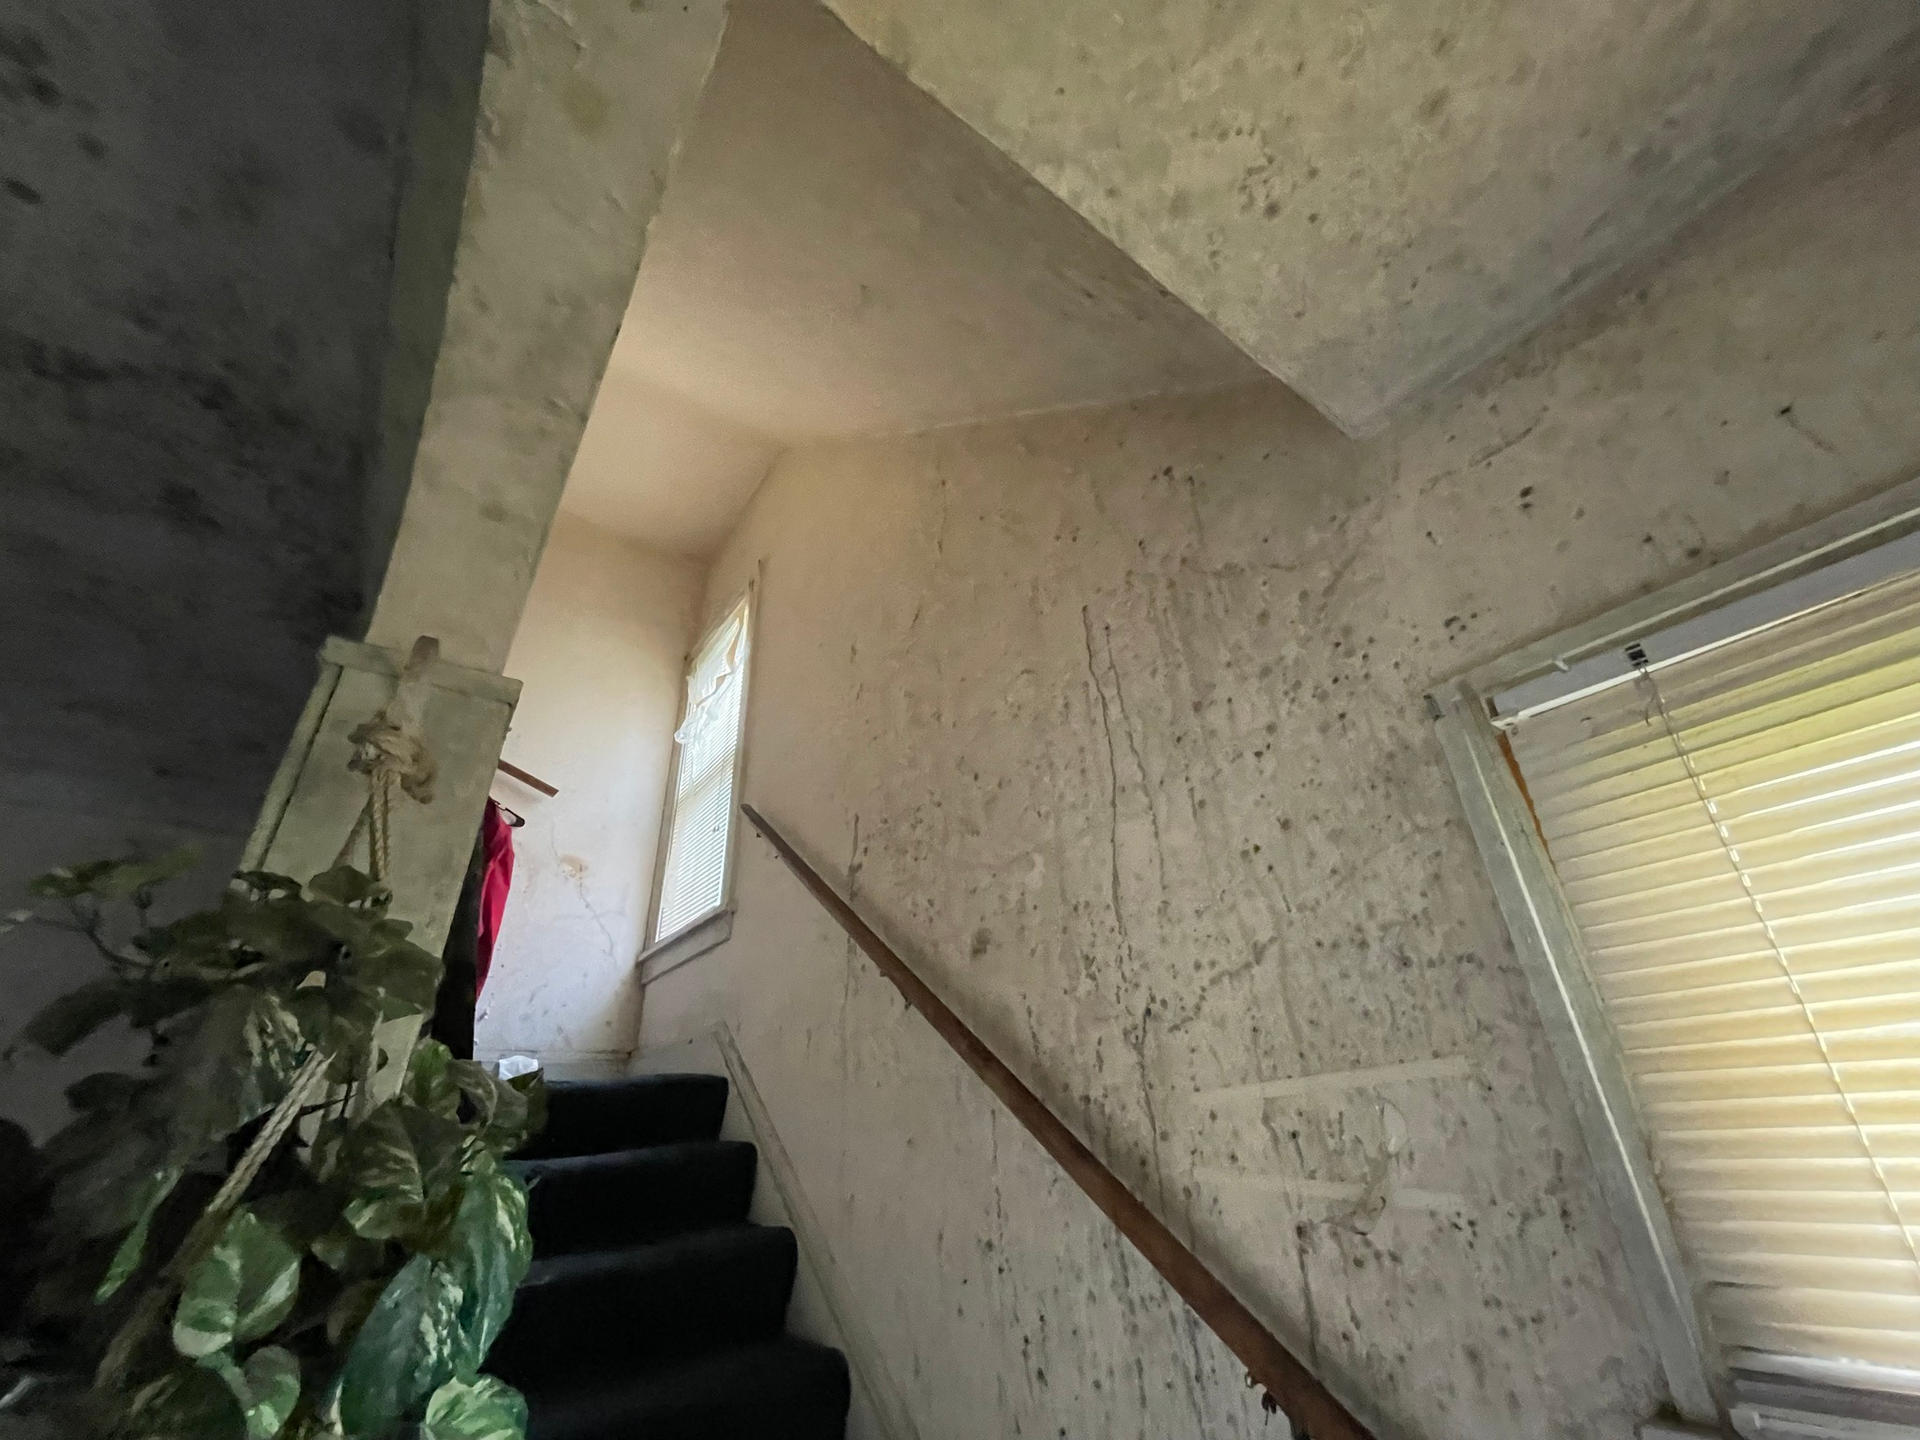 This house was neglected for several years and had a severe mold problem, the owners called Unified Restoration Systems!